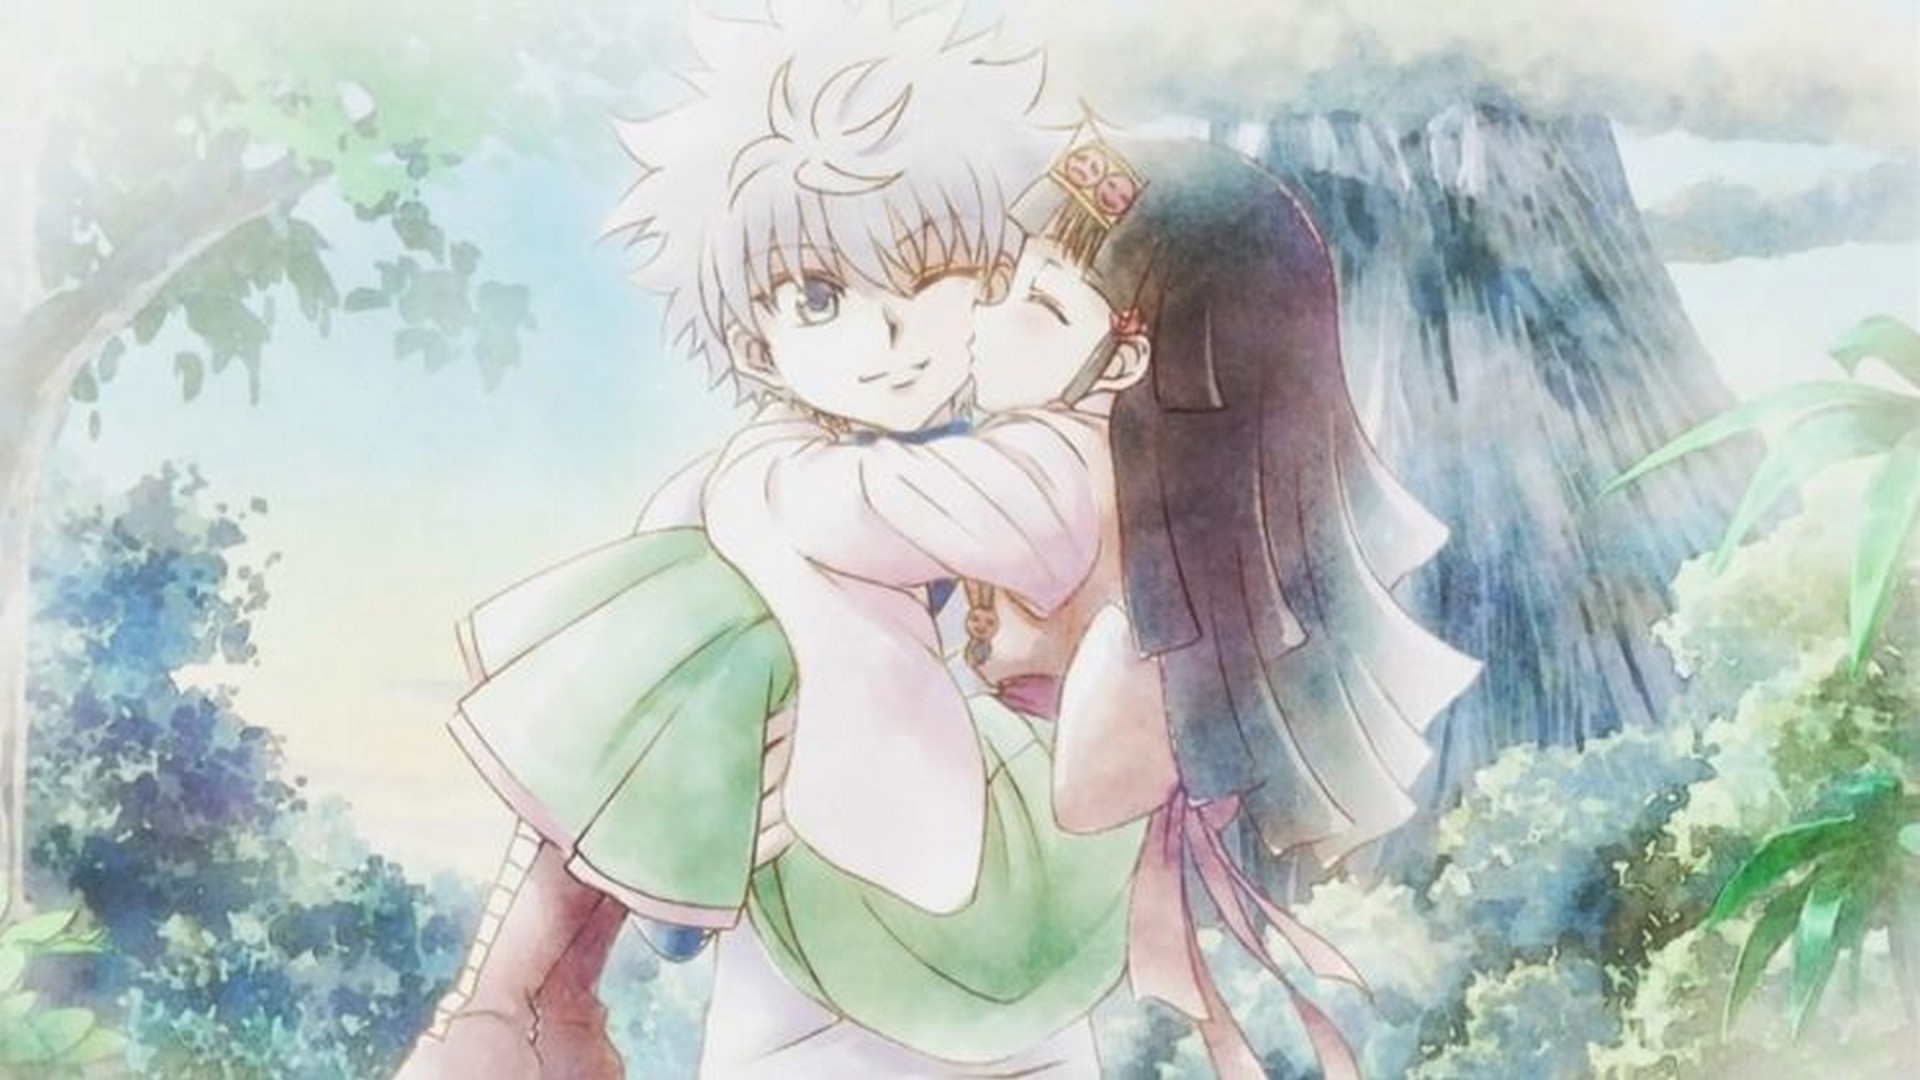 Wallpapers Killua with high-resolution 1920x1080 pixel. You can use this poster wallpaper for your Desktop Computers, Mac Screensavers, Windows Backgrounds, iPhone Wallpapers, Tablet or Android Lock screen and another Mobile device